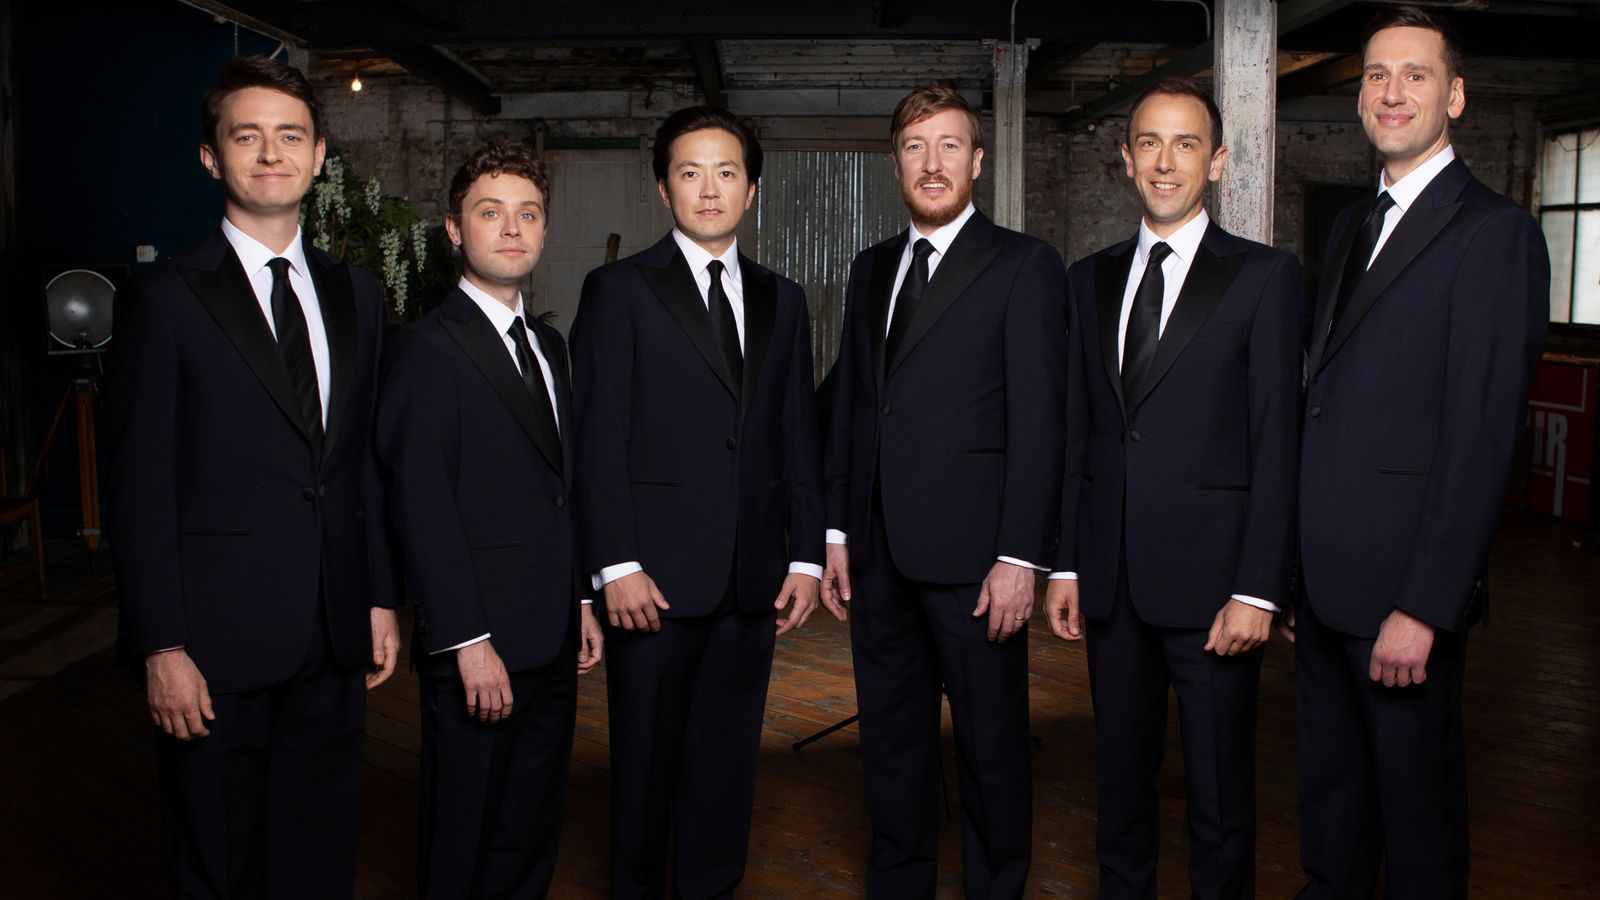 The King's Singers 'saddened' after college in Florida cancels show over lifestyle which 'violates' scripture